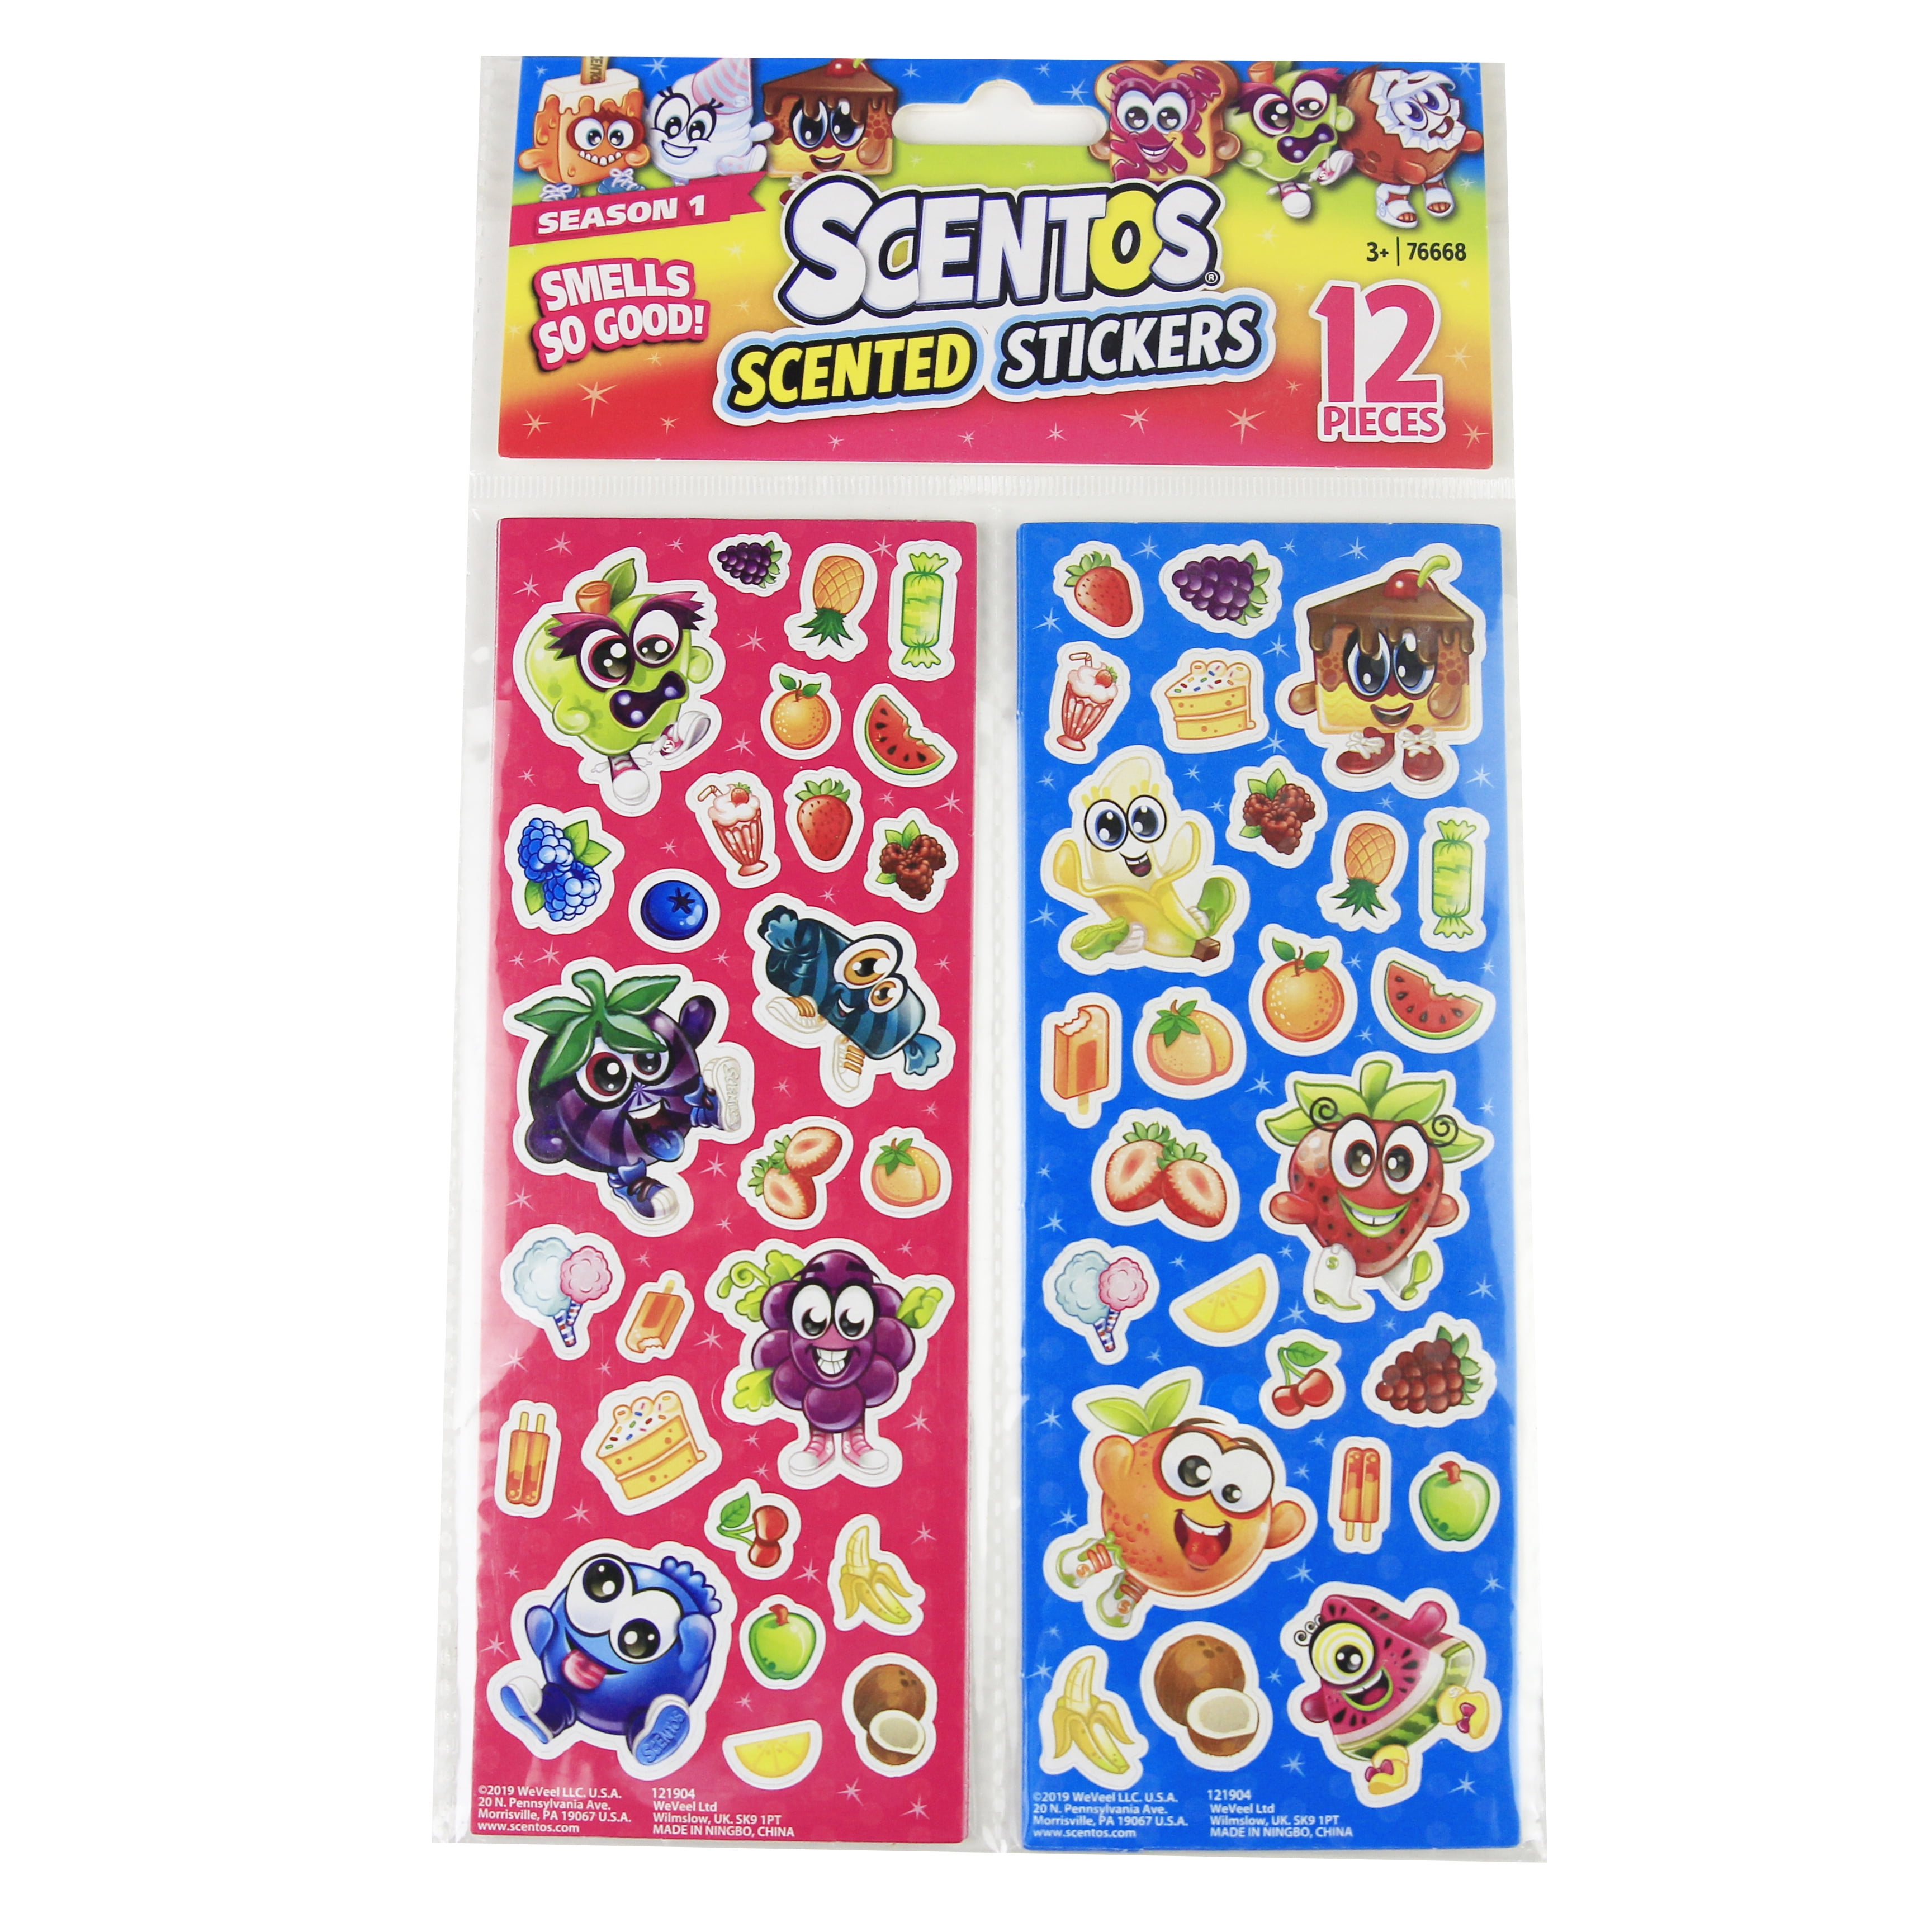 Scentos Scented 12 Pack Stickers, Party Favors, Birthday Party